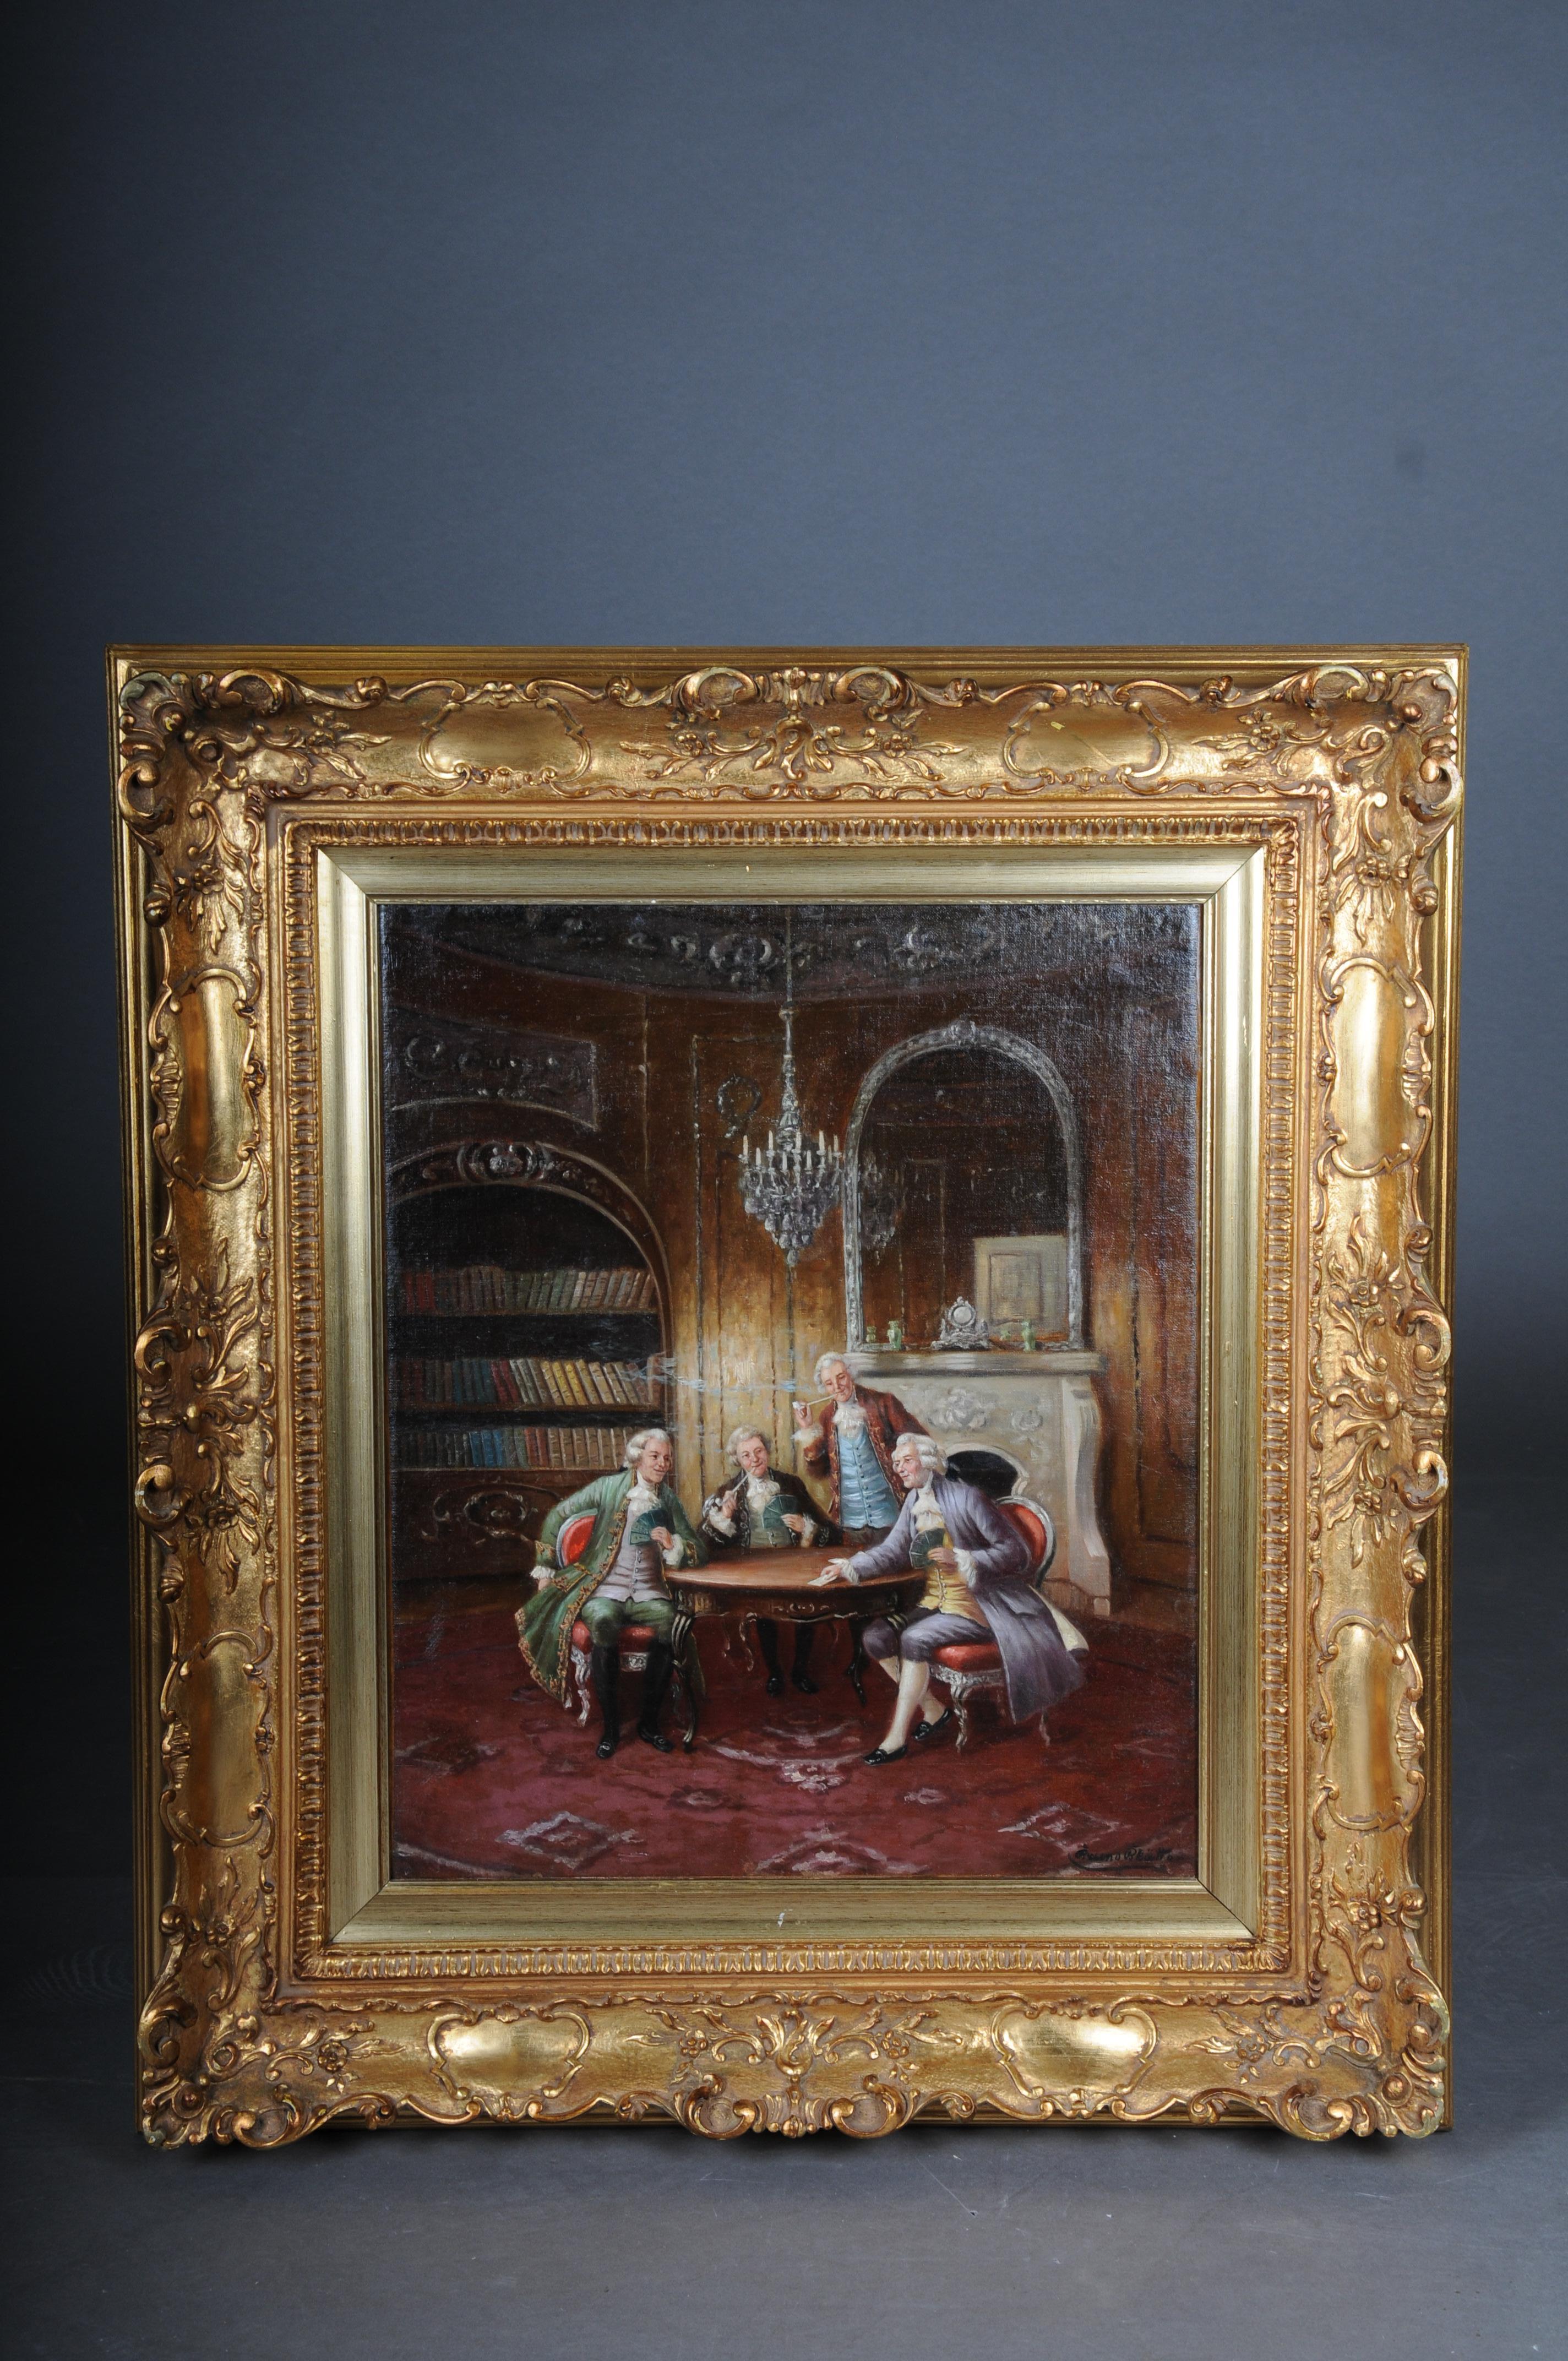 Rococo oil painting signed Bruno Blätter around 1890

Oil on canvas painting. Rococo scene. Three gentlemen seated at the table, playing cards and smoking a pipe. Gentlemen dressed in high-class manners with amusing facial expressions sitting at a